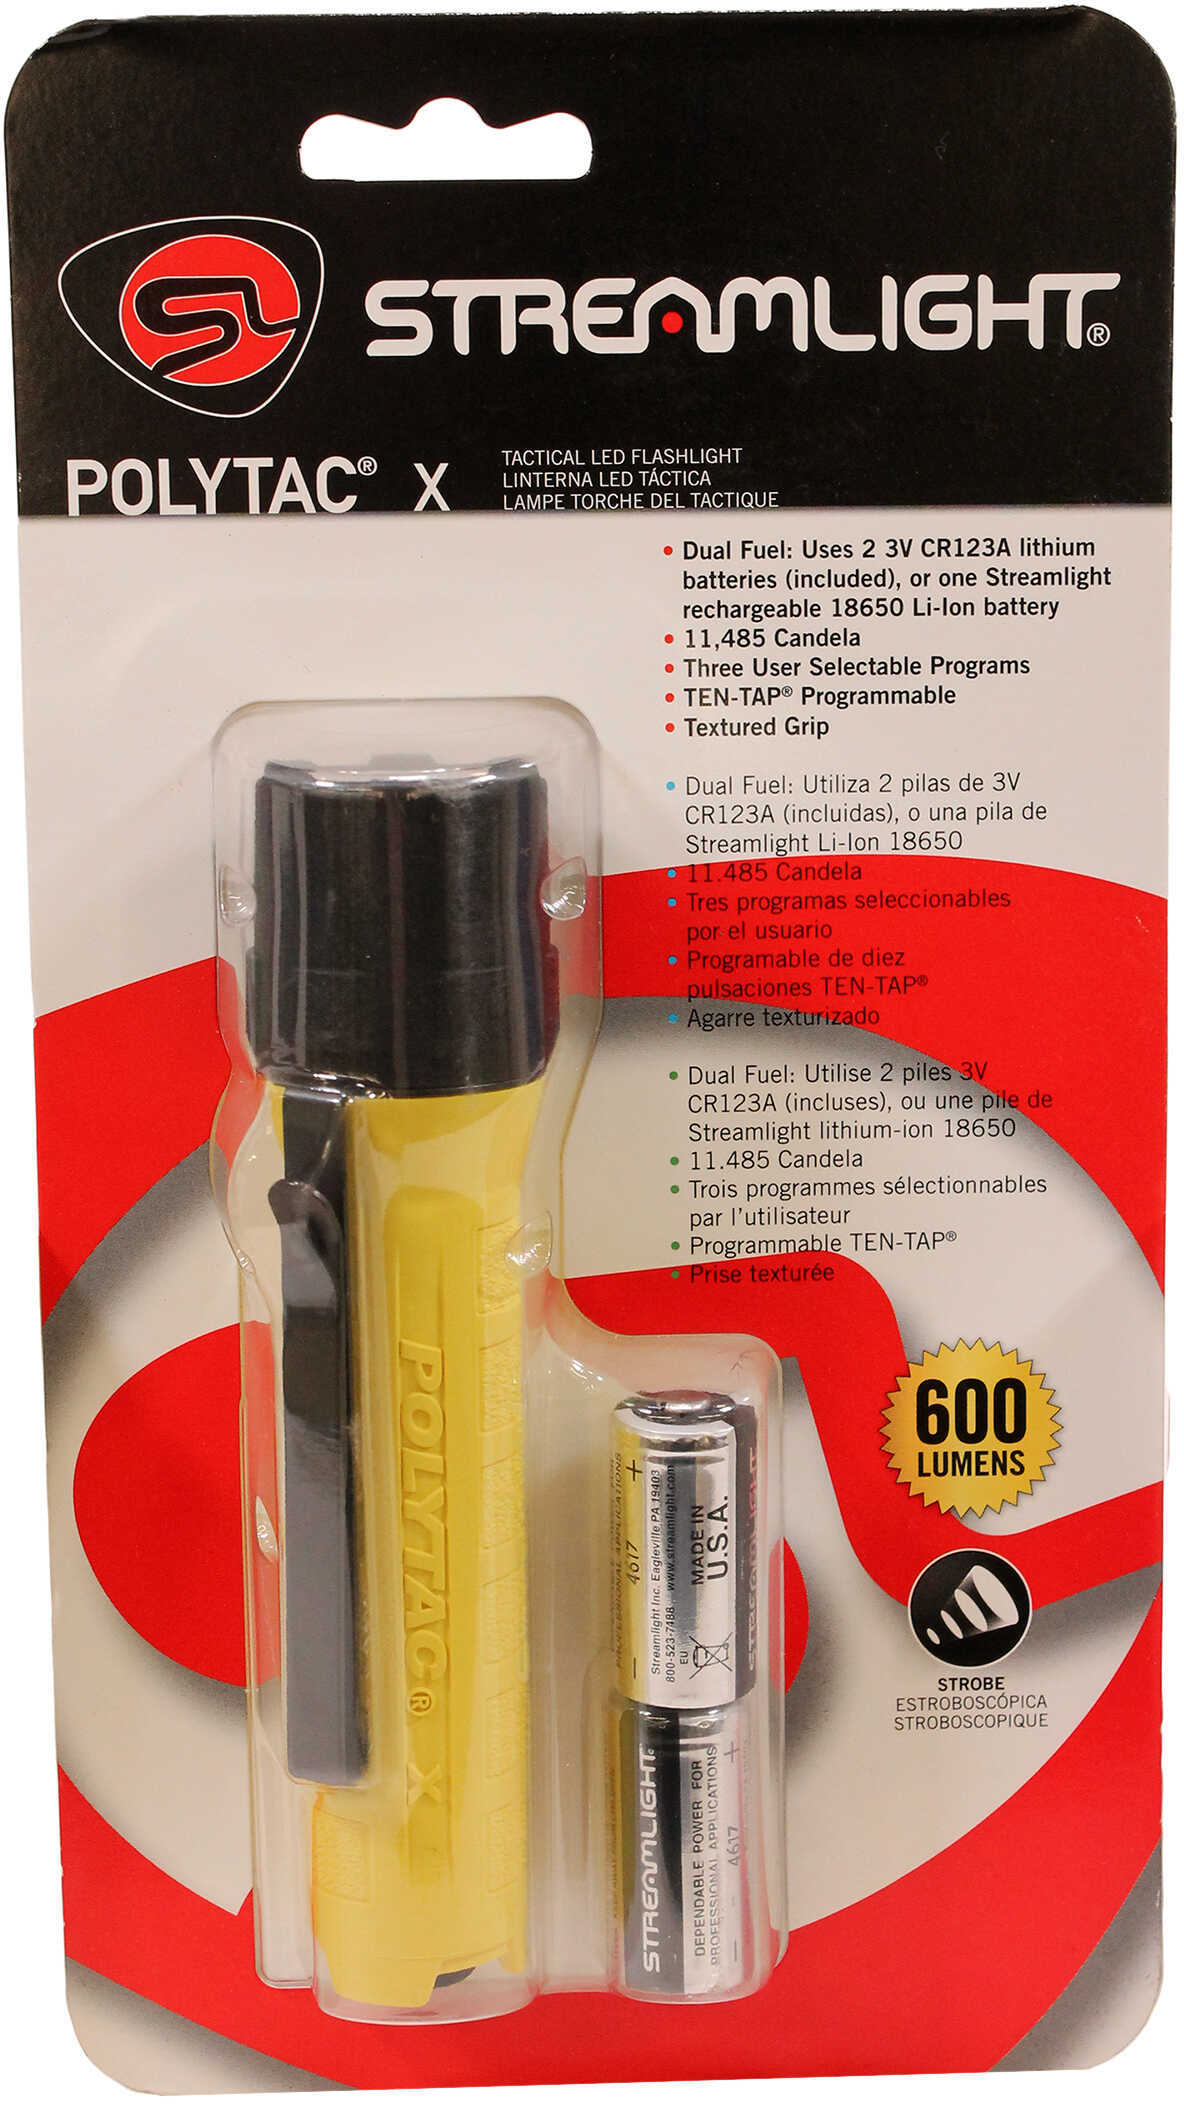 Streamlight PolyTac X Professional Tactical Light 600 Lumens, Yellow, Clam Package